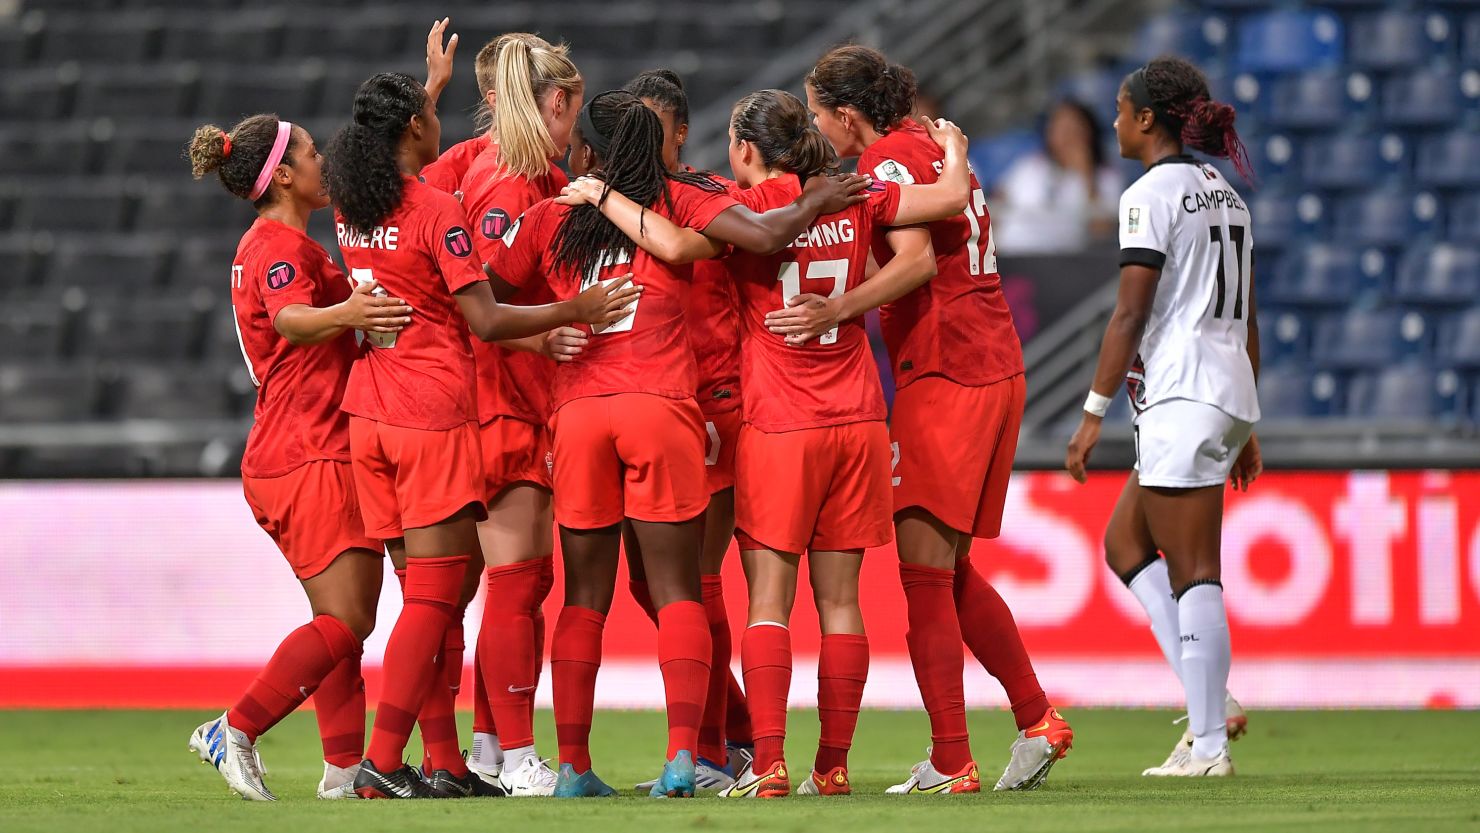 The team's strike action was canceled Sunday after Canada Soccer threatened the players with "legal action" which could have resulted in "millions of dollars of damage" for "an unlawful strike," according to the Canadian Soccer Players' Association.